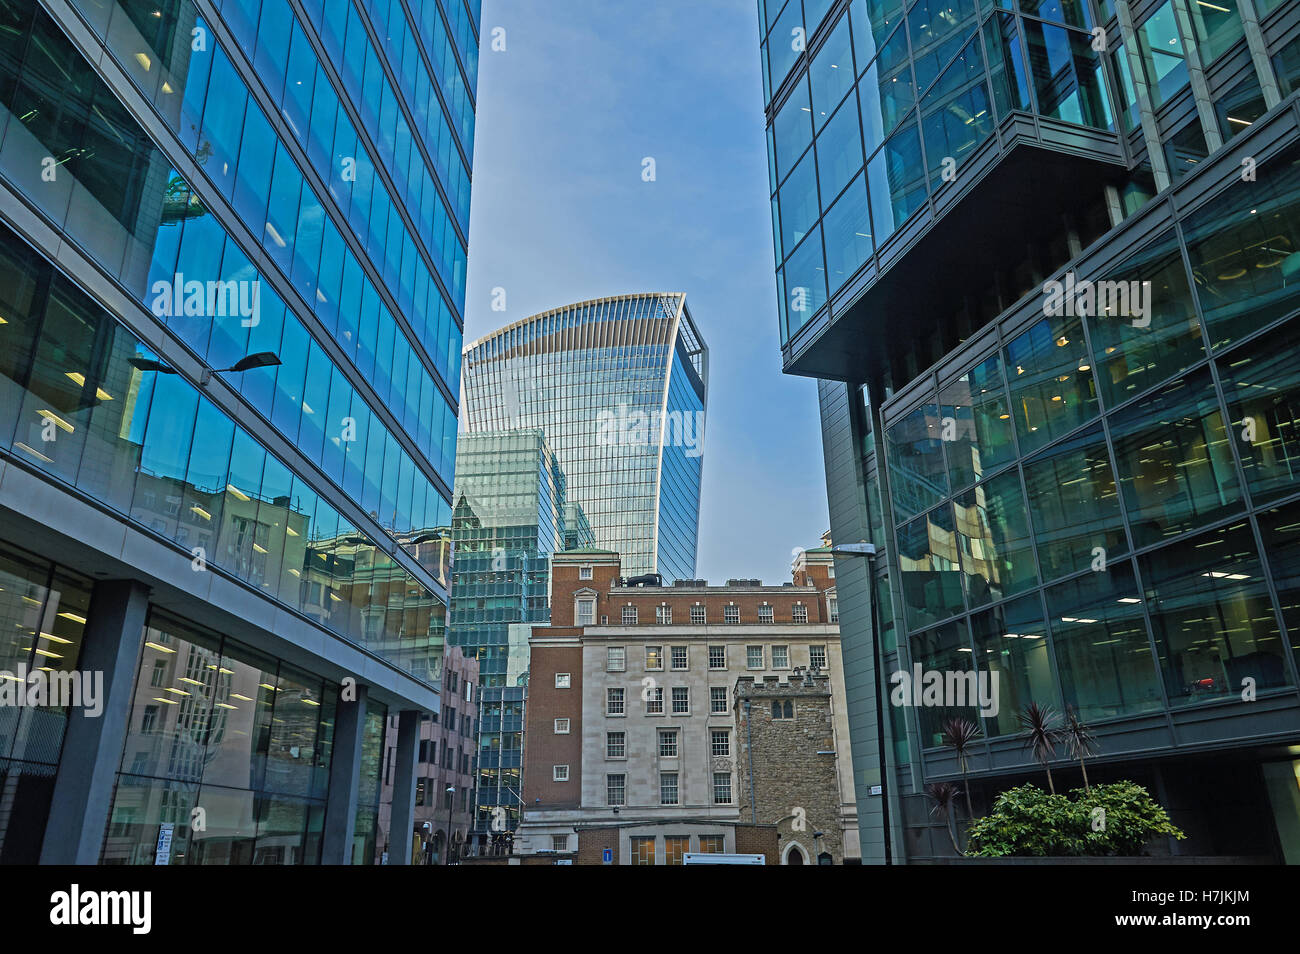 Old and new buildings form the sky line in the heart of the financial district in the City of London. Stock Photo